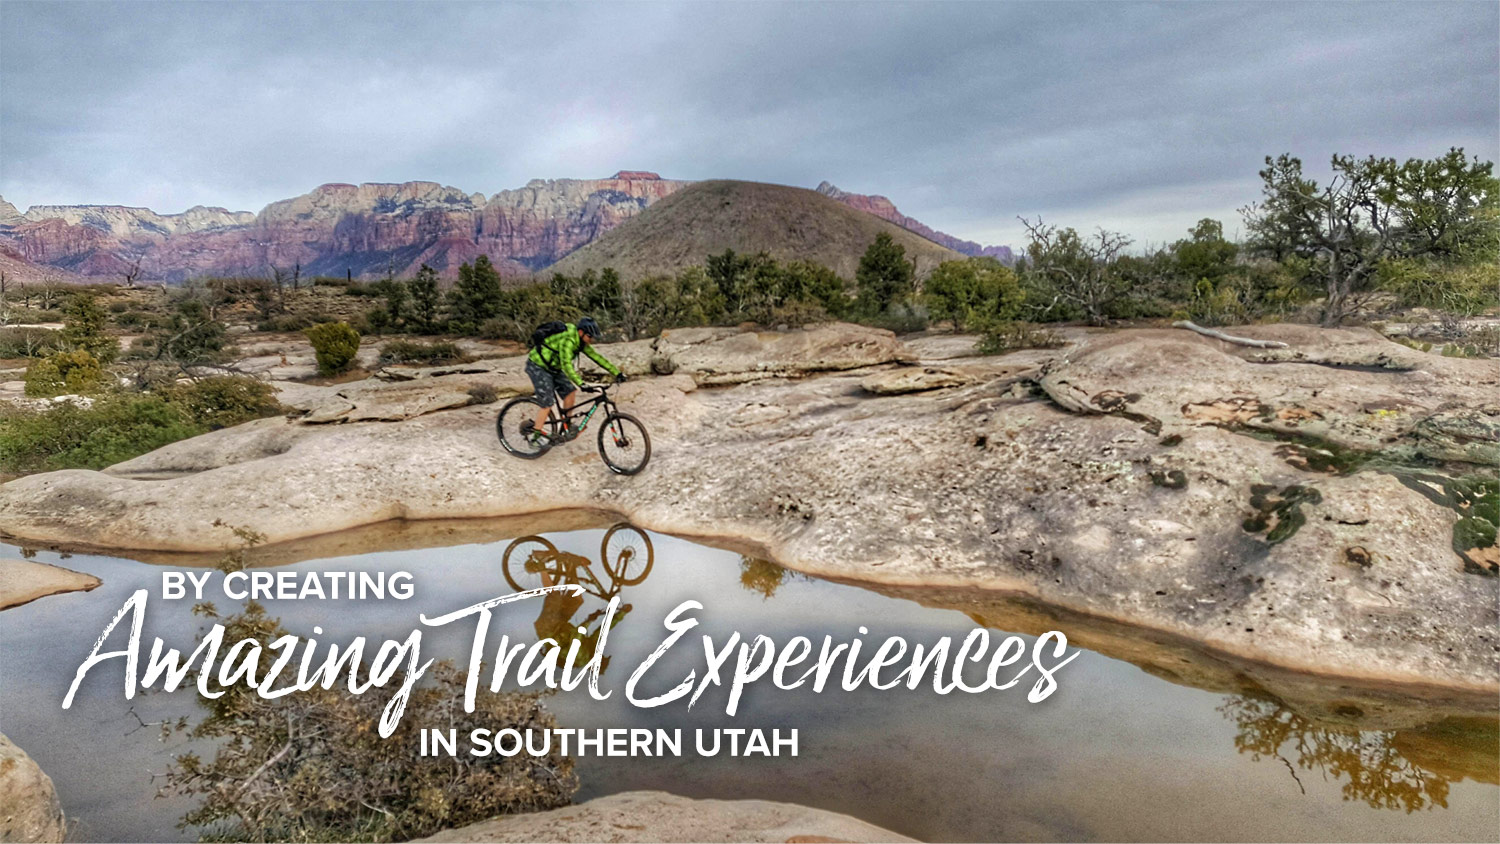 By creating amazing trail experiences in Southern Utah